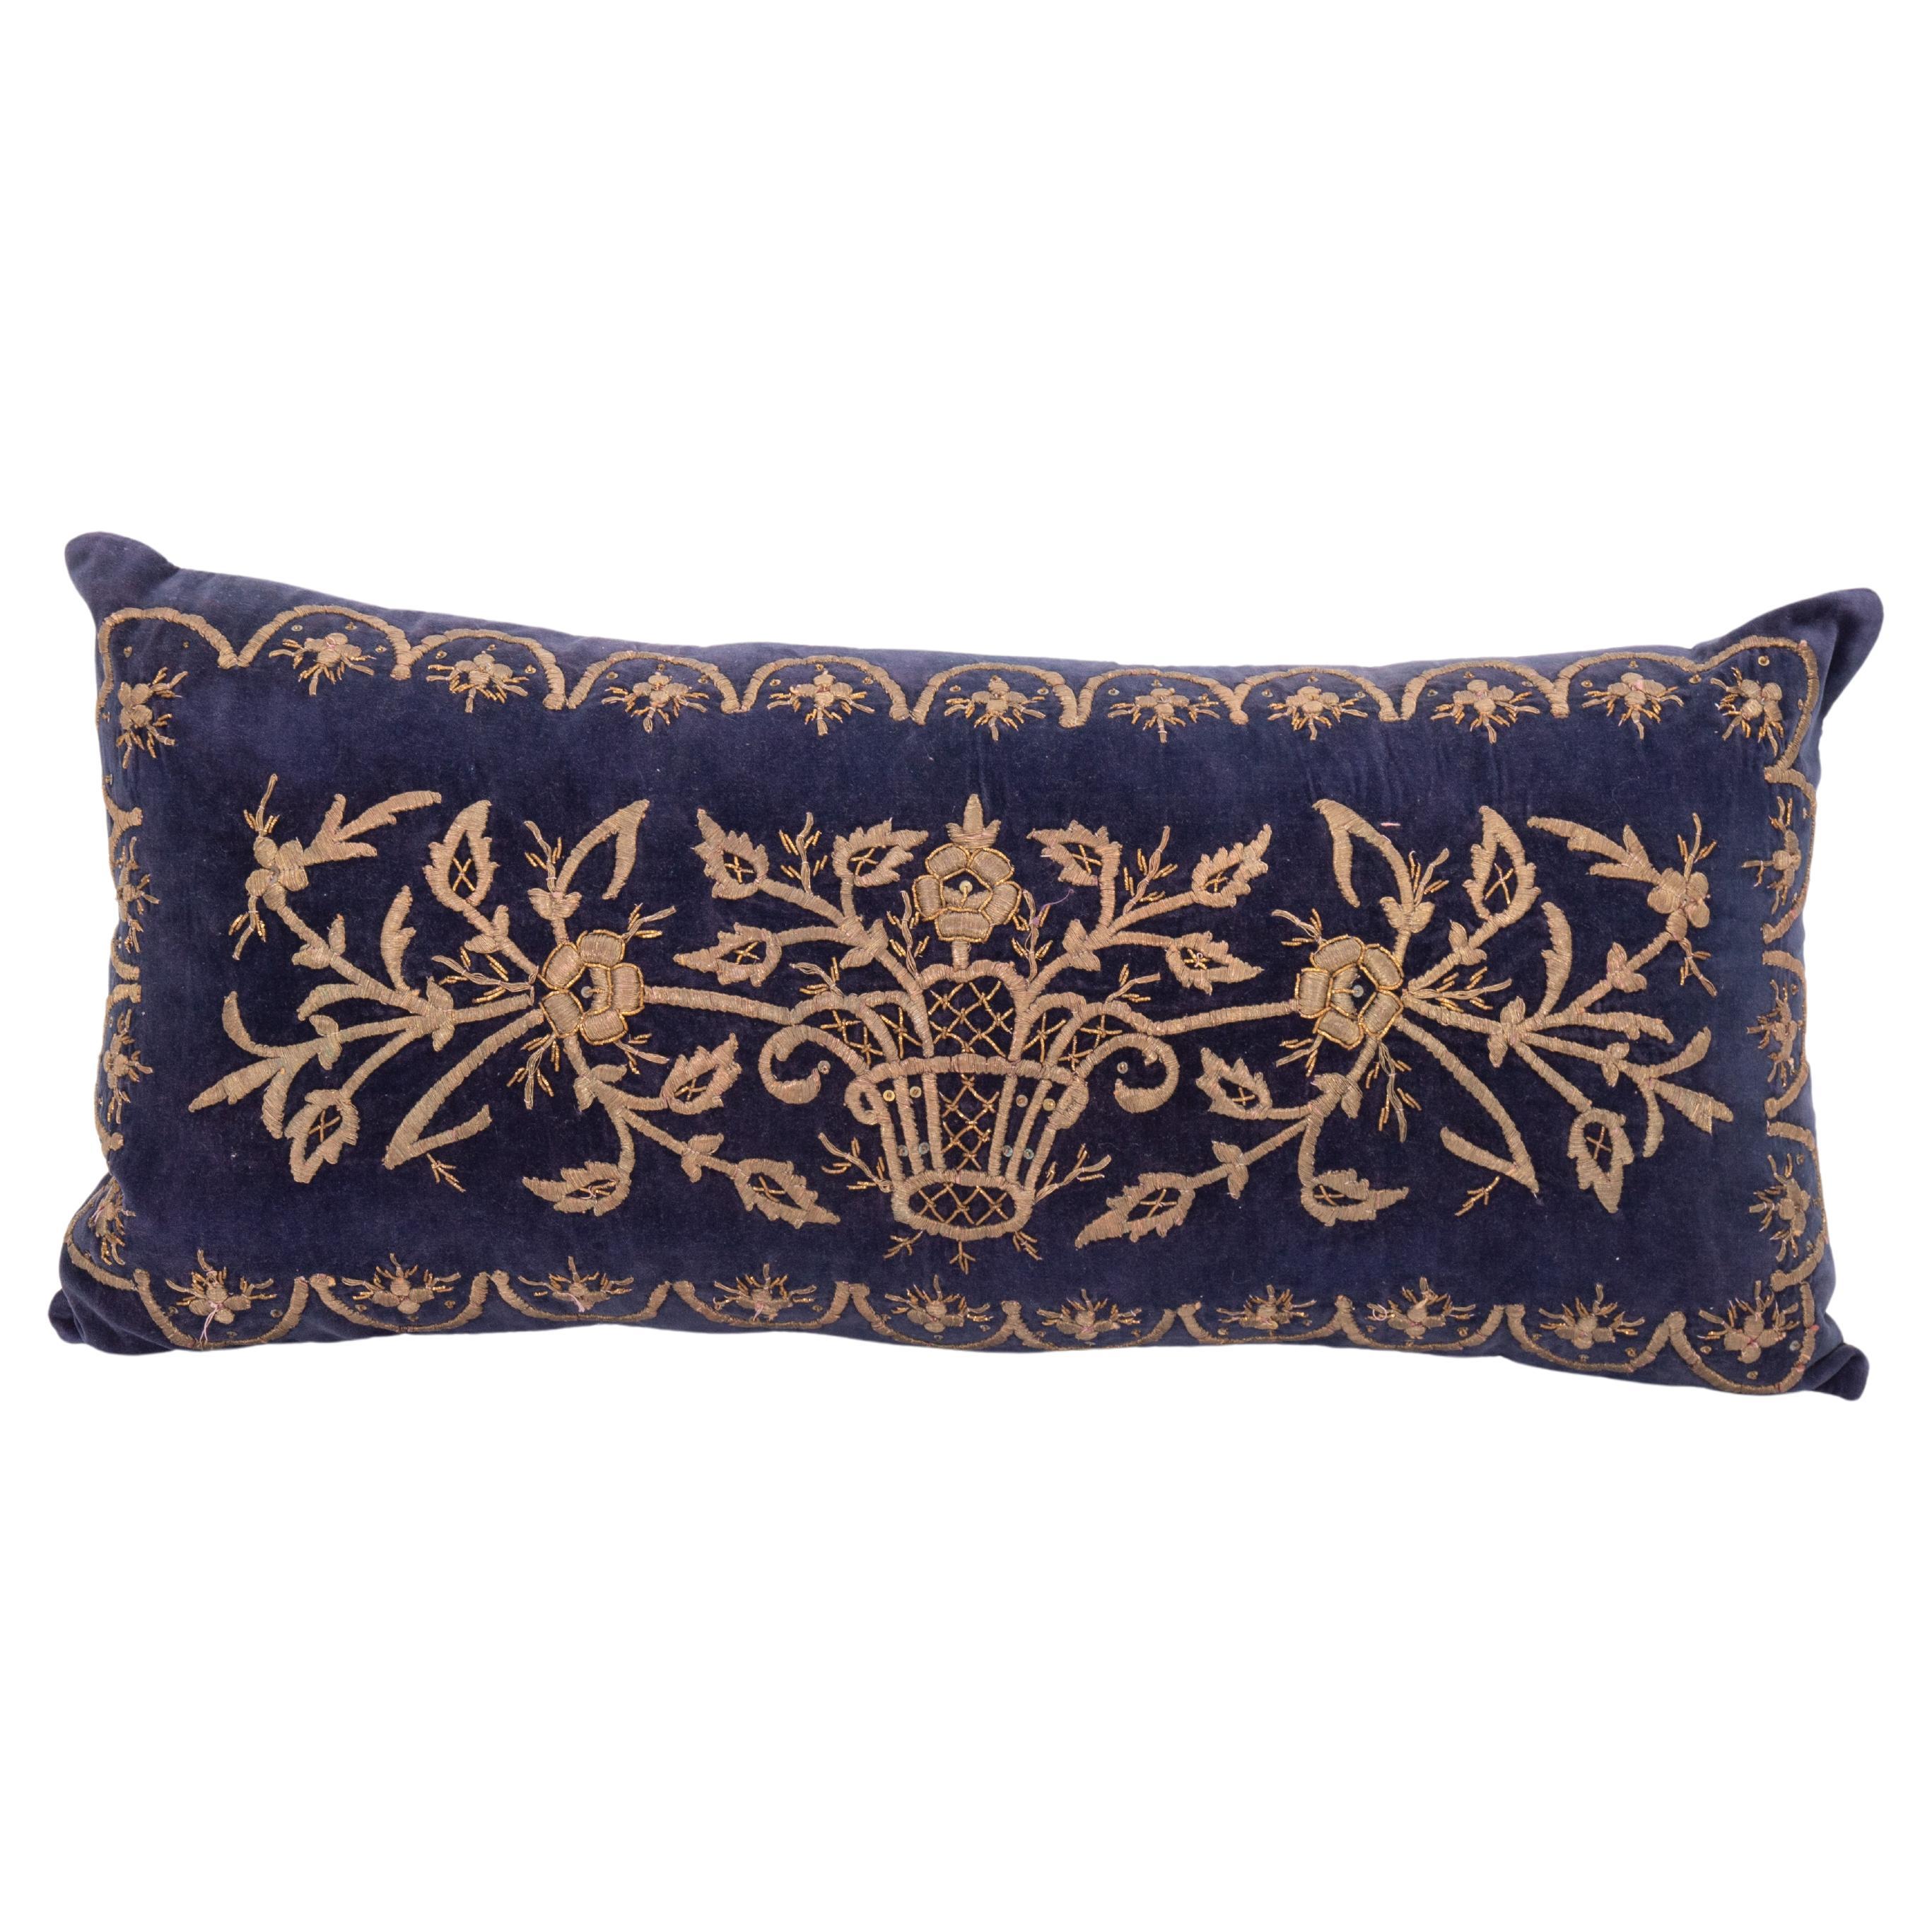 Ottoman Pillow Cover in Sarma Technique, late 19th / Early 20th C. For Sale